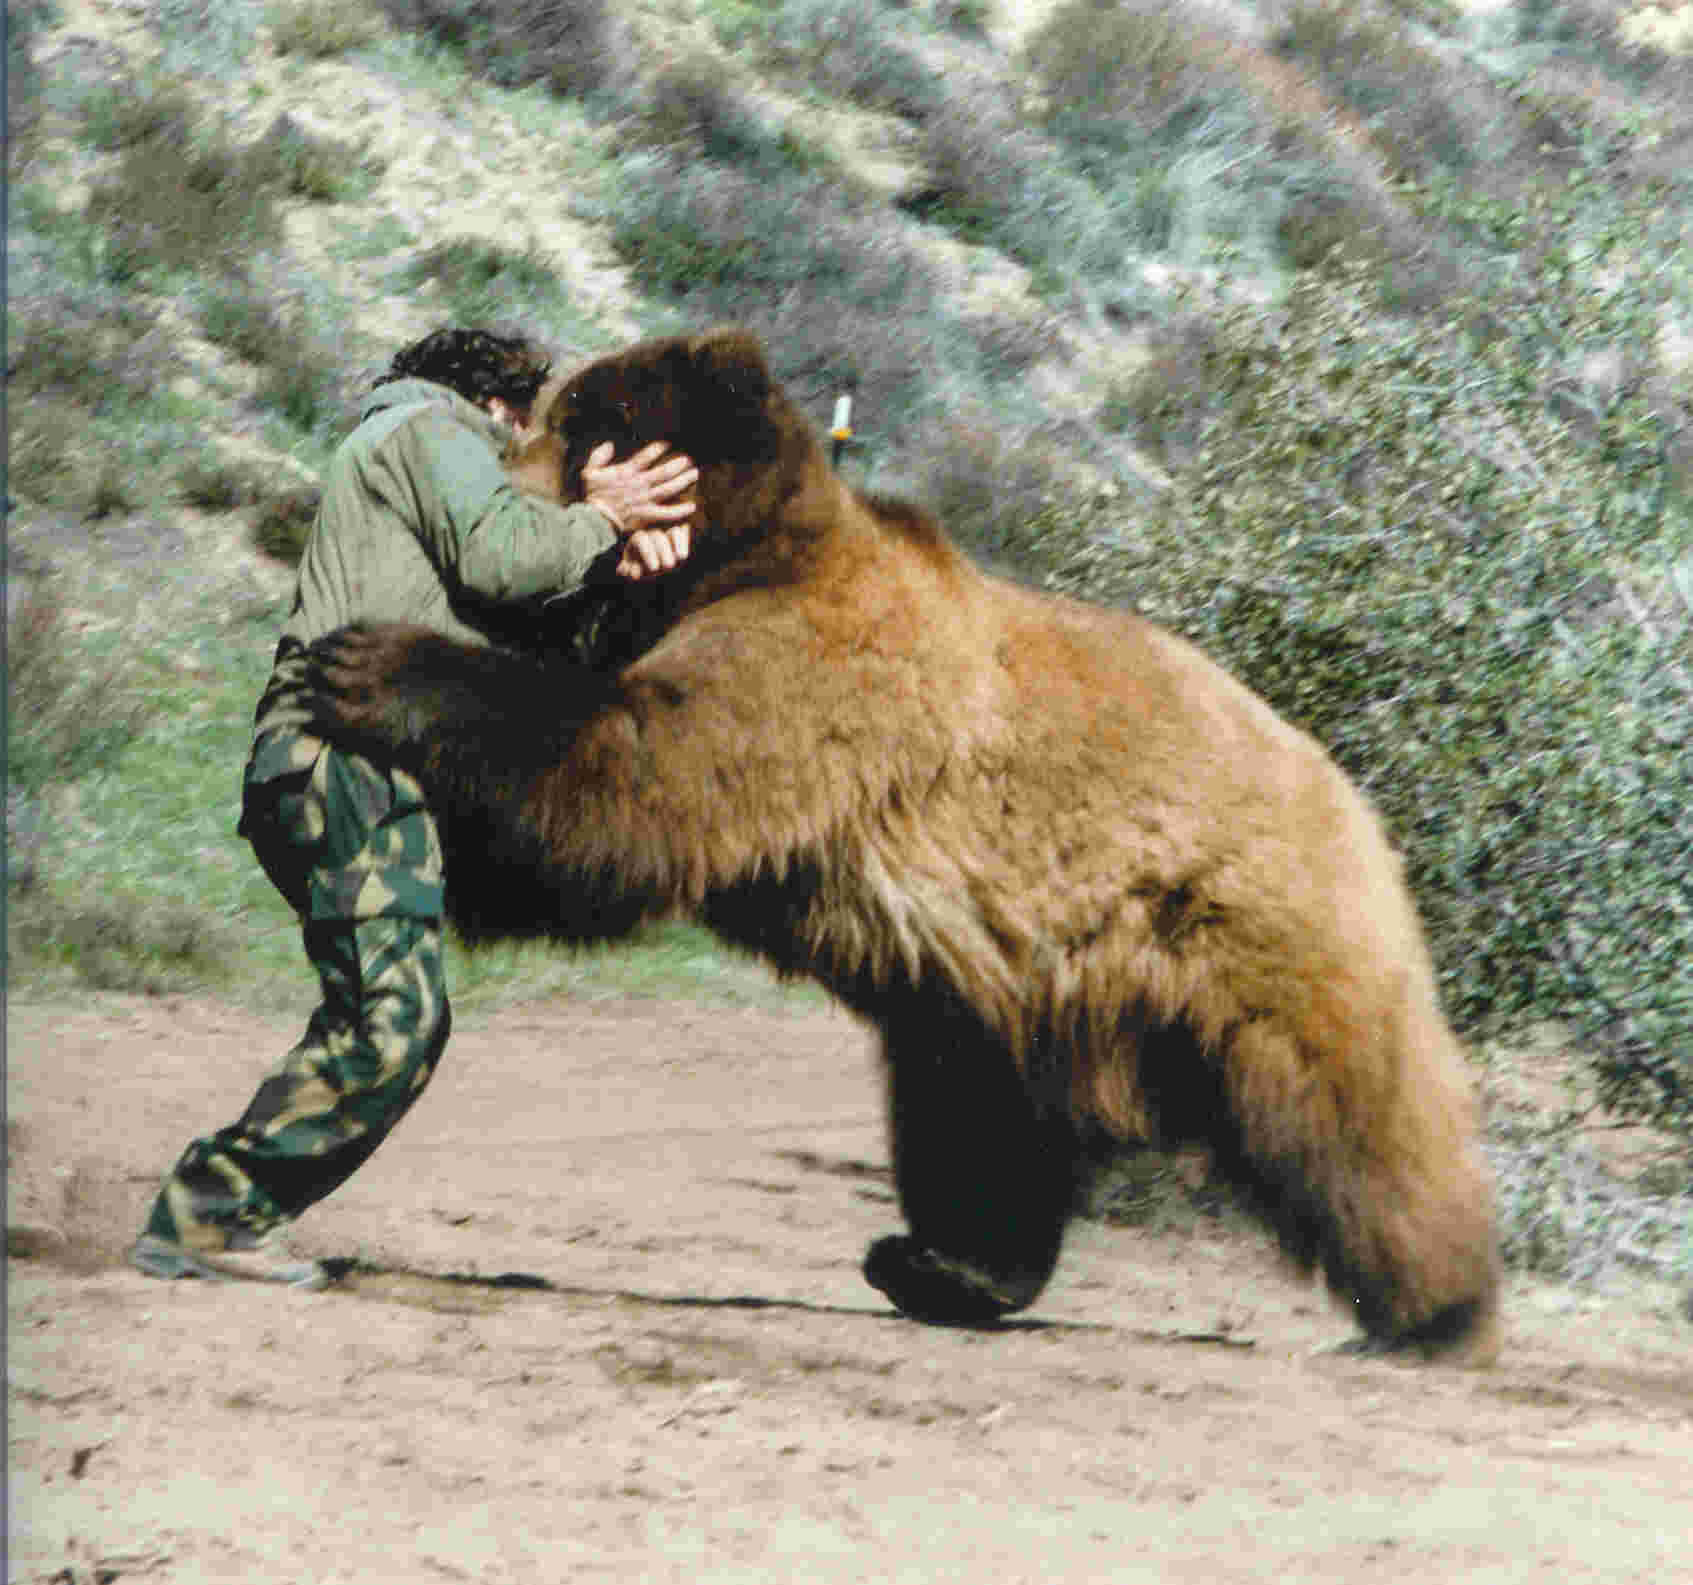 Full Contact with BARNEY BEAR Kodiak Grizzly!